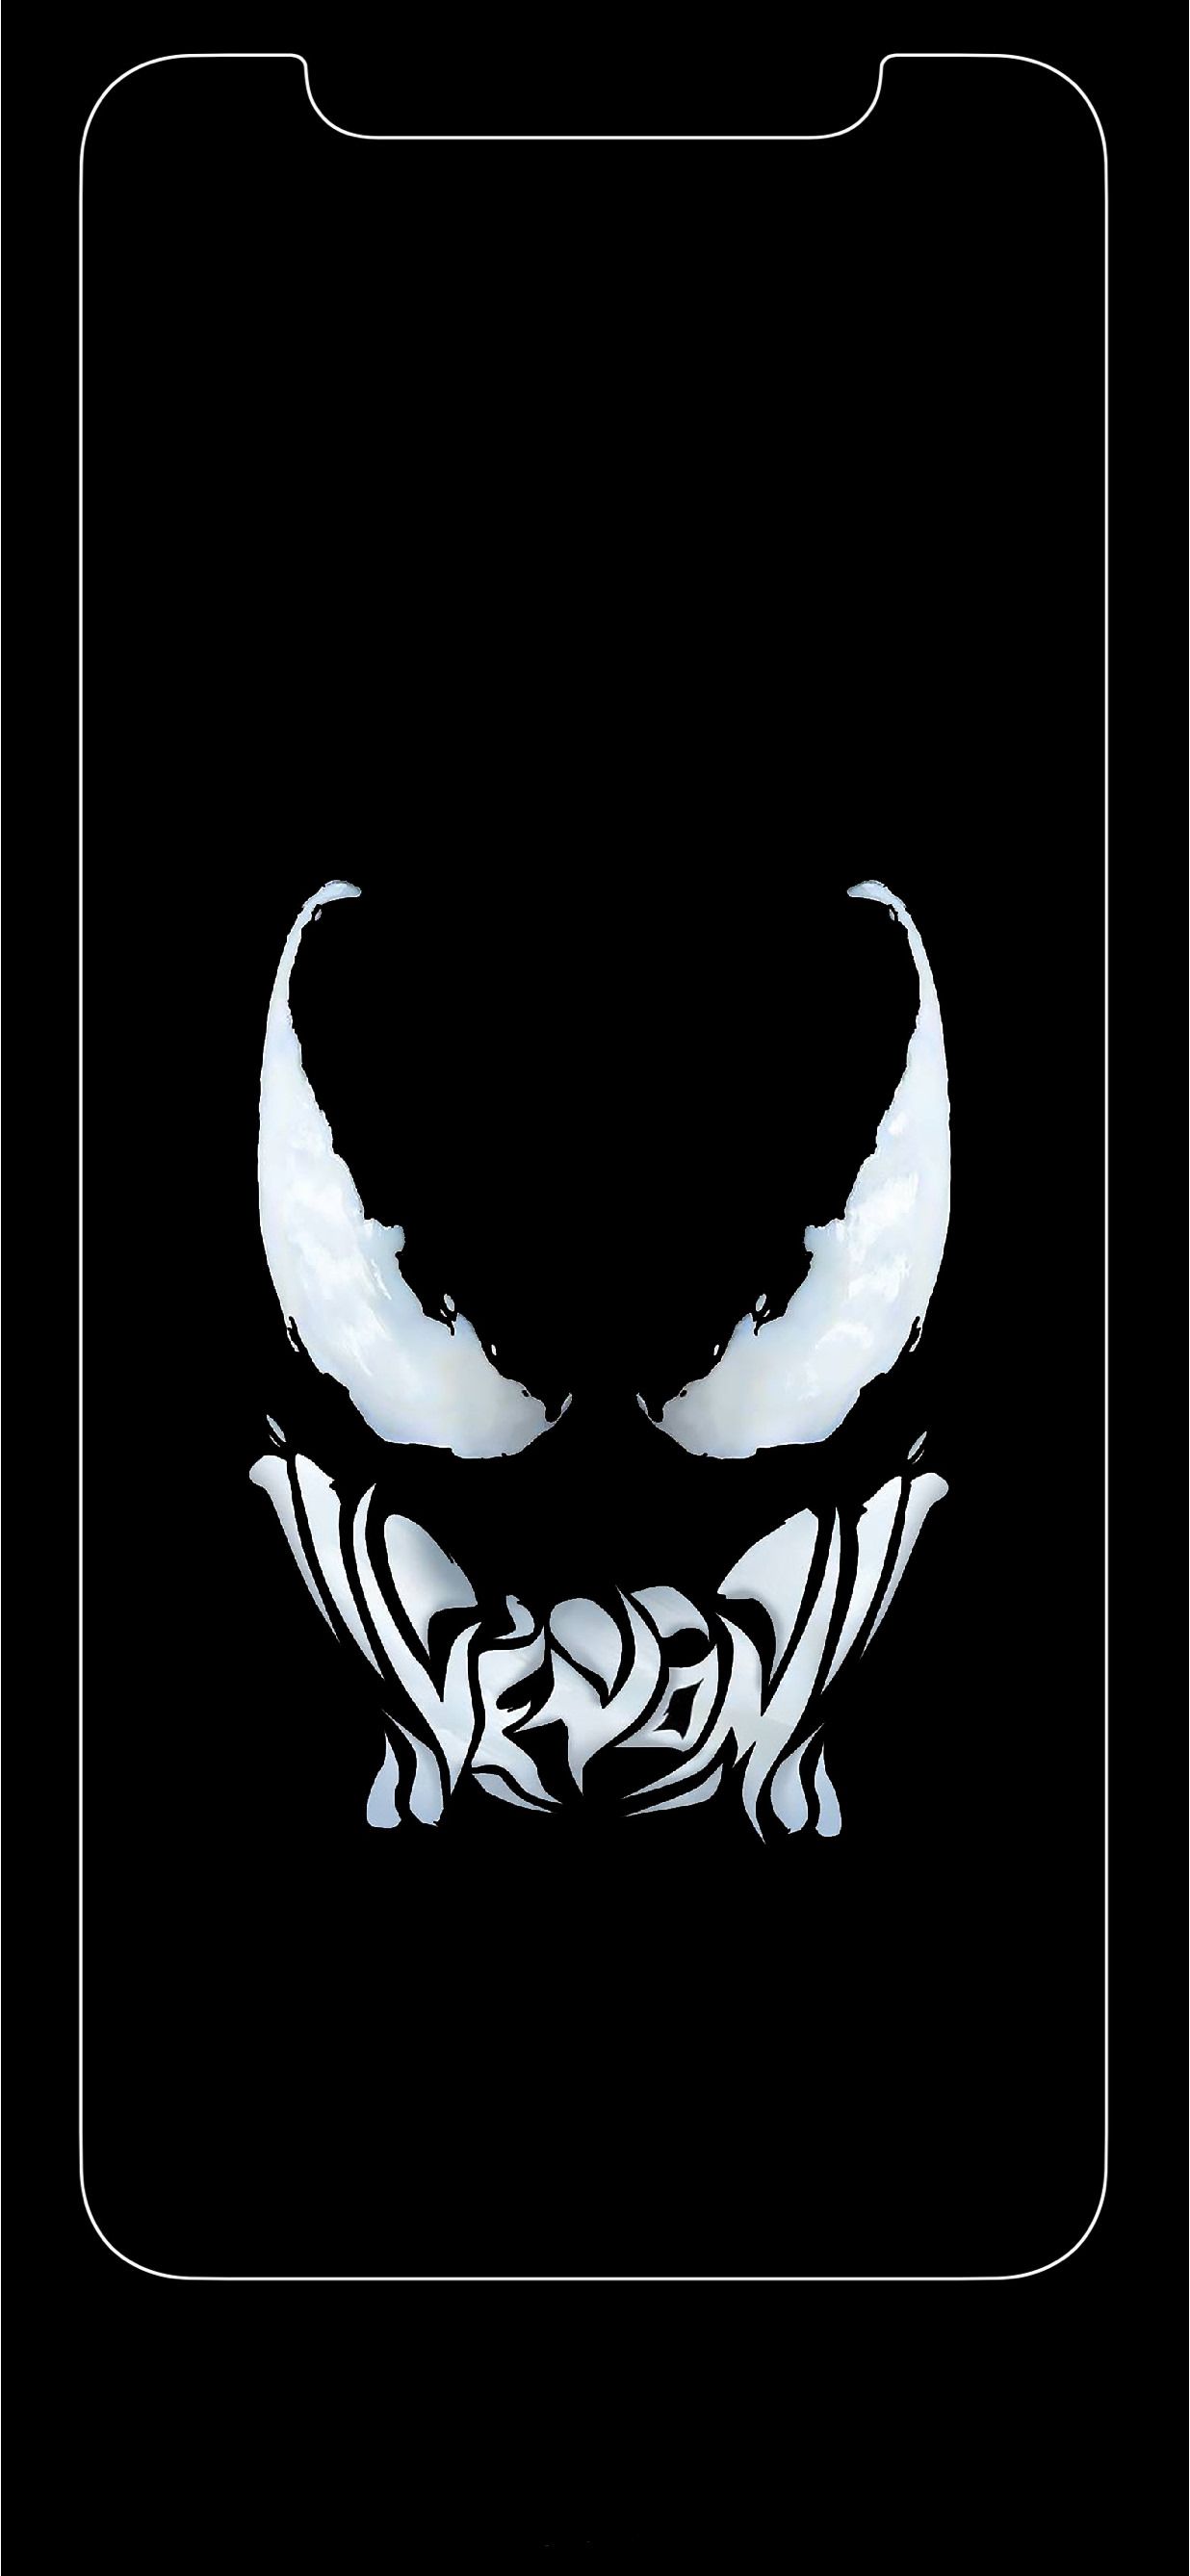 Maybe I like the borders too much. Here are two Venom wallpaper